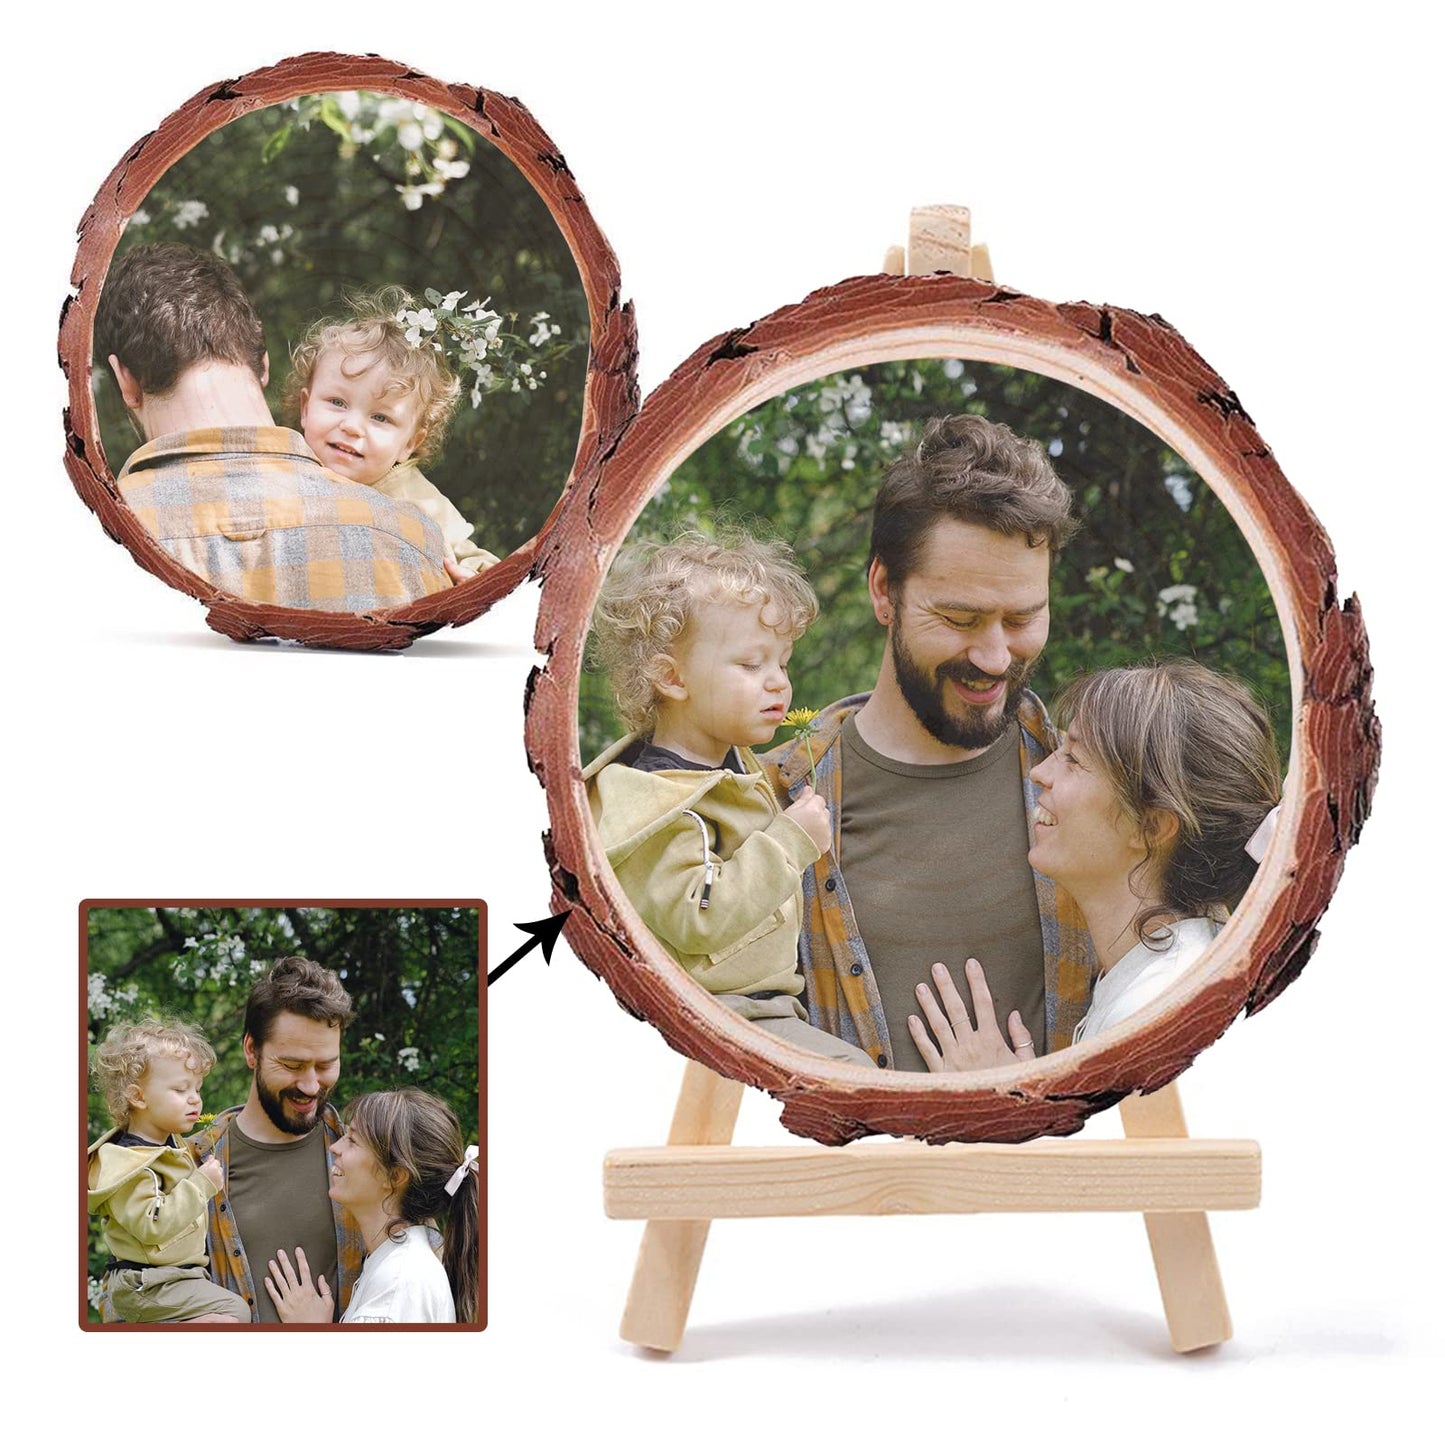 Personalized Picture Frame Custom Photo Printing on Wood Slices Wooden Craft with Bracket Customized Photo Gifts for Christmas Birthday Anniversary